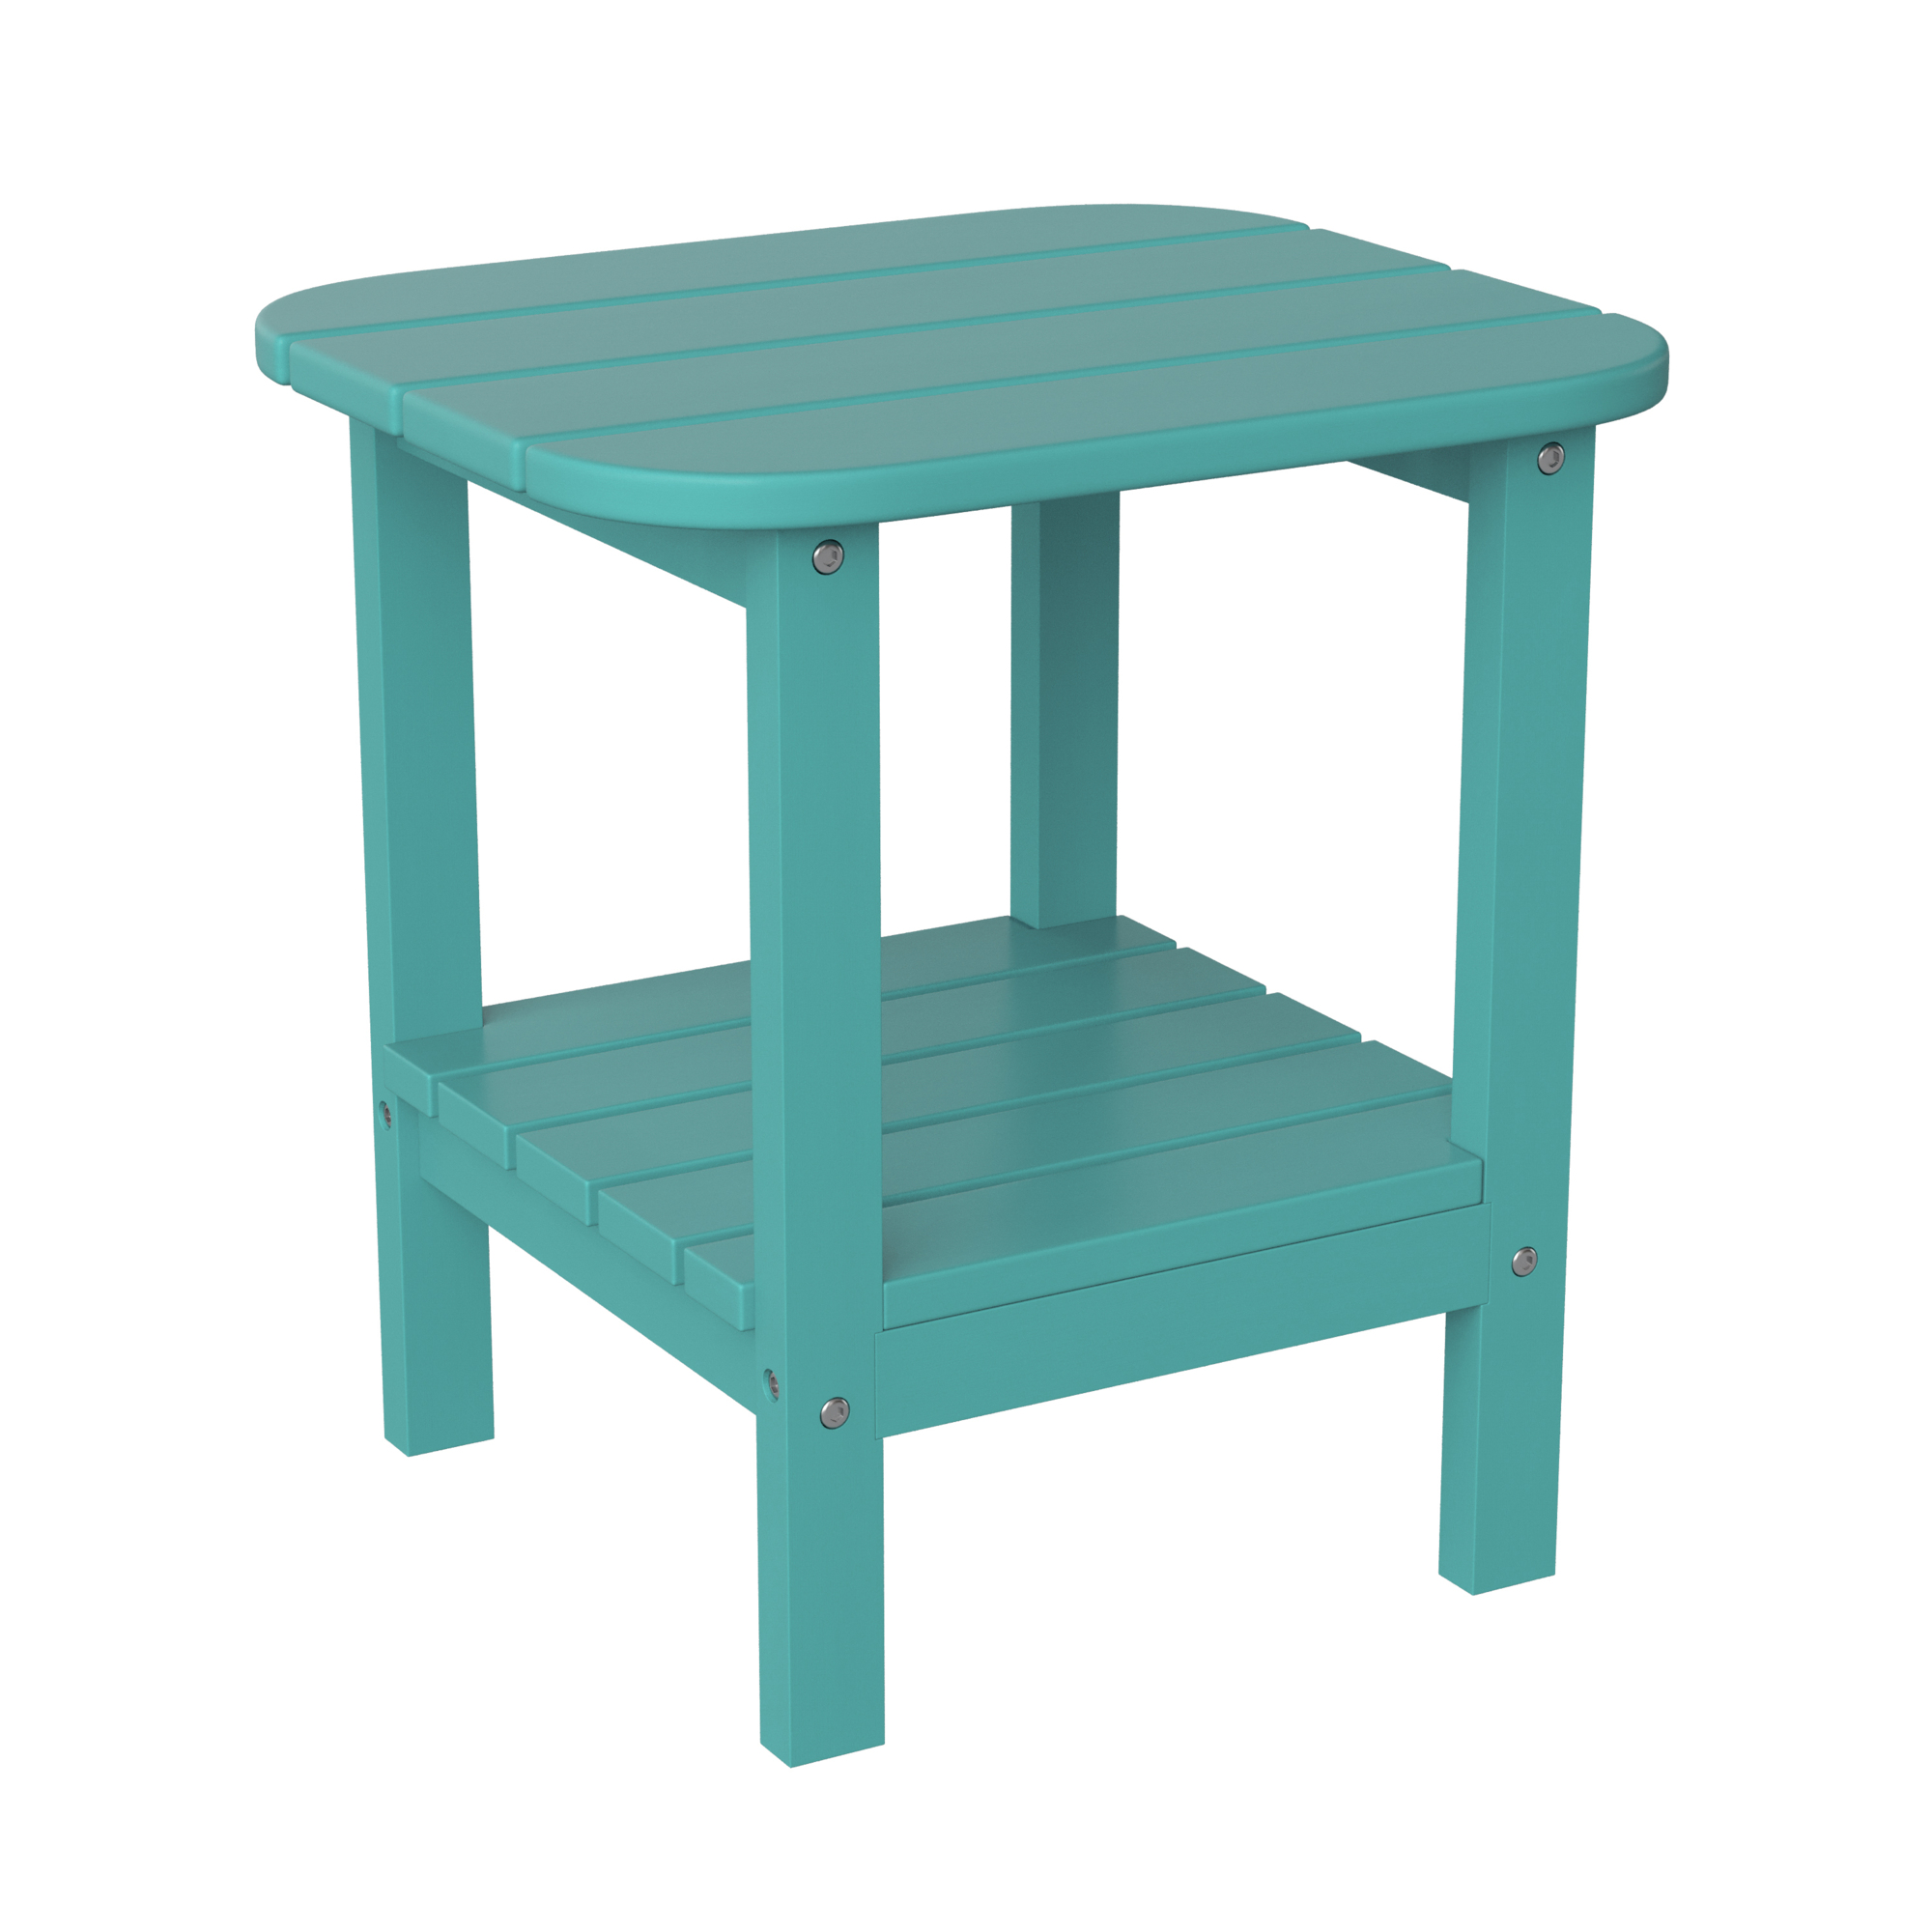 Flash Furniture, Blue 2 Tier Adirondack Style Patio Side Table, Table Shape Rectangle, Primary Color Blue, Height 17.75 in, Model LEHMP1351517HBL